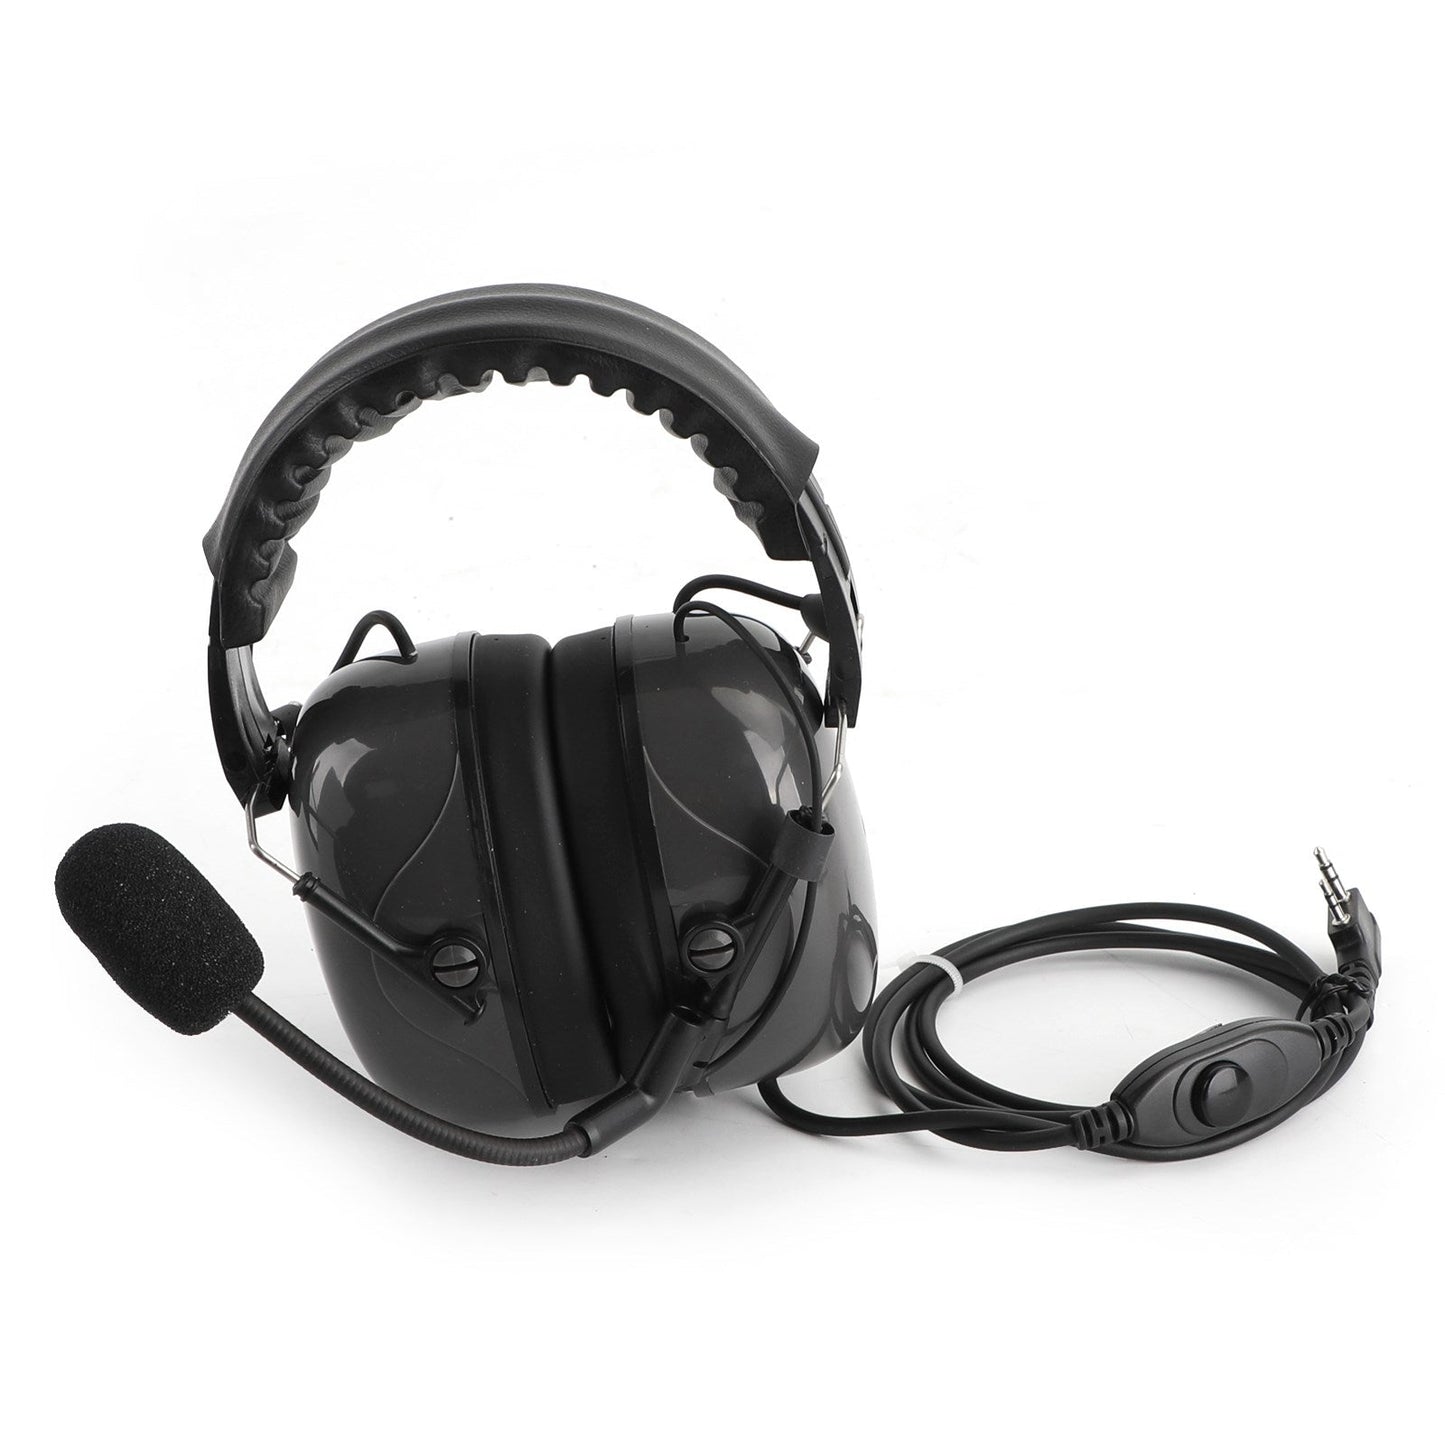 Overhead Noise Cancelling Headset Fit for TK3107 TK3200 TK2160 BaoFeng BF-888S